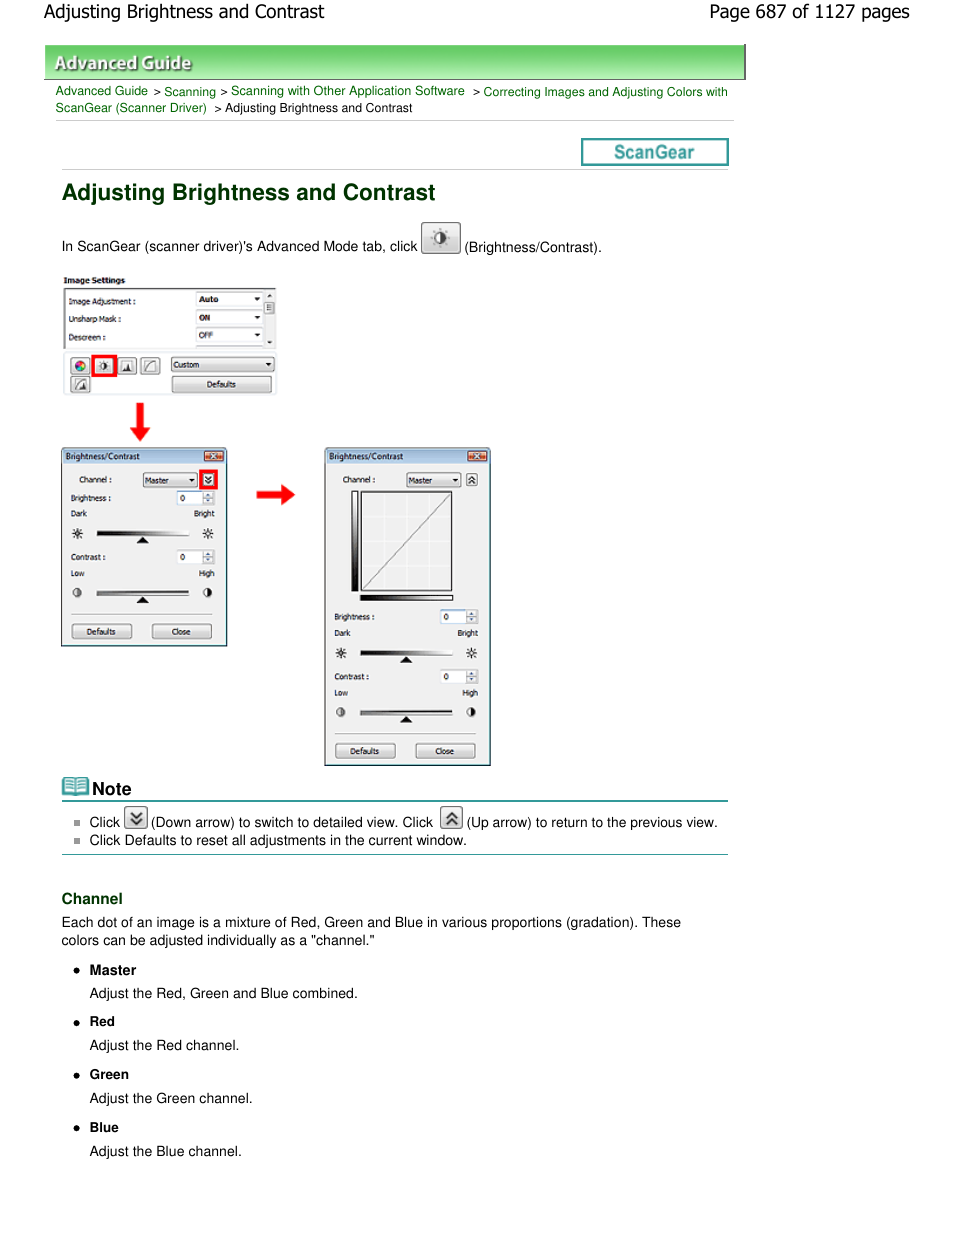 Adjusting brightness and contrast | Canon PIXMA MX870 User Manual | Page  687 / 1127